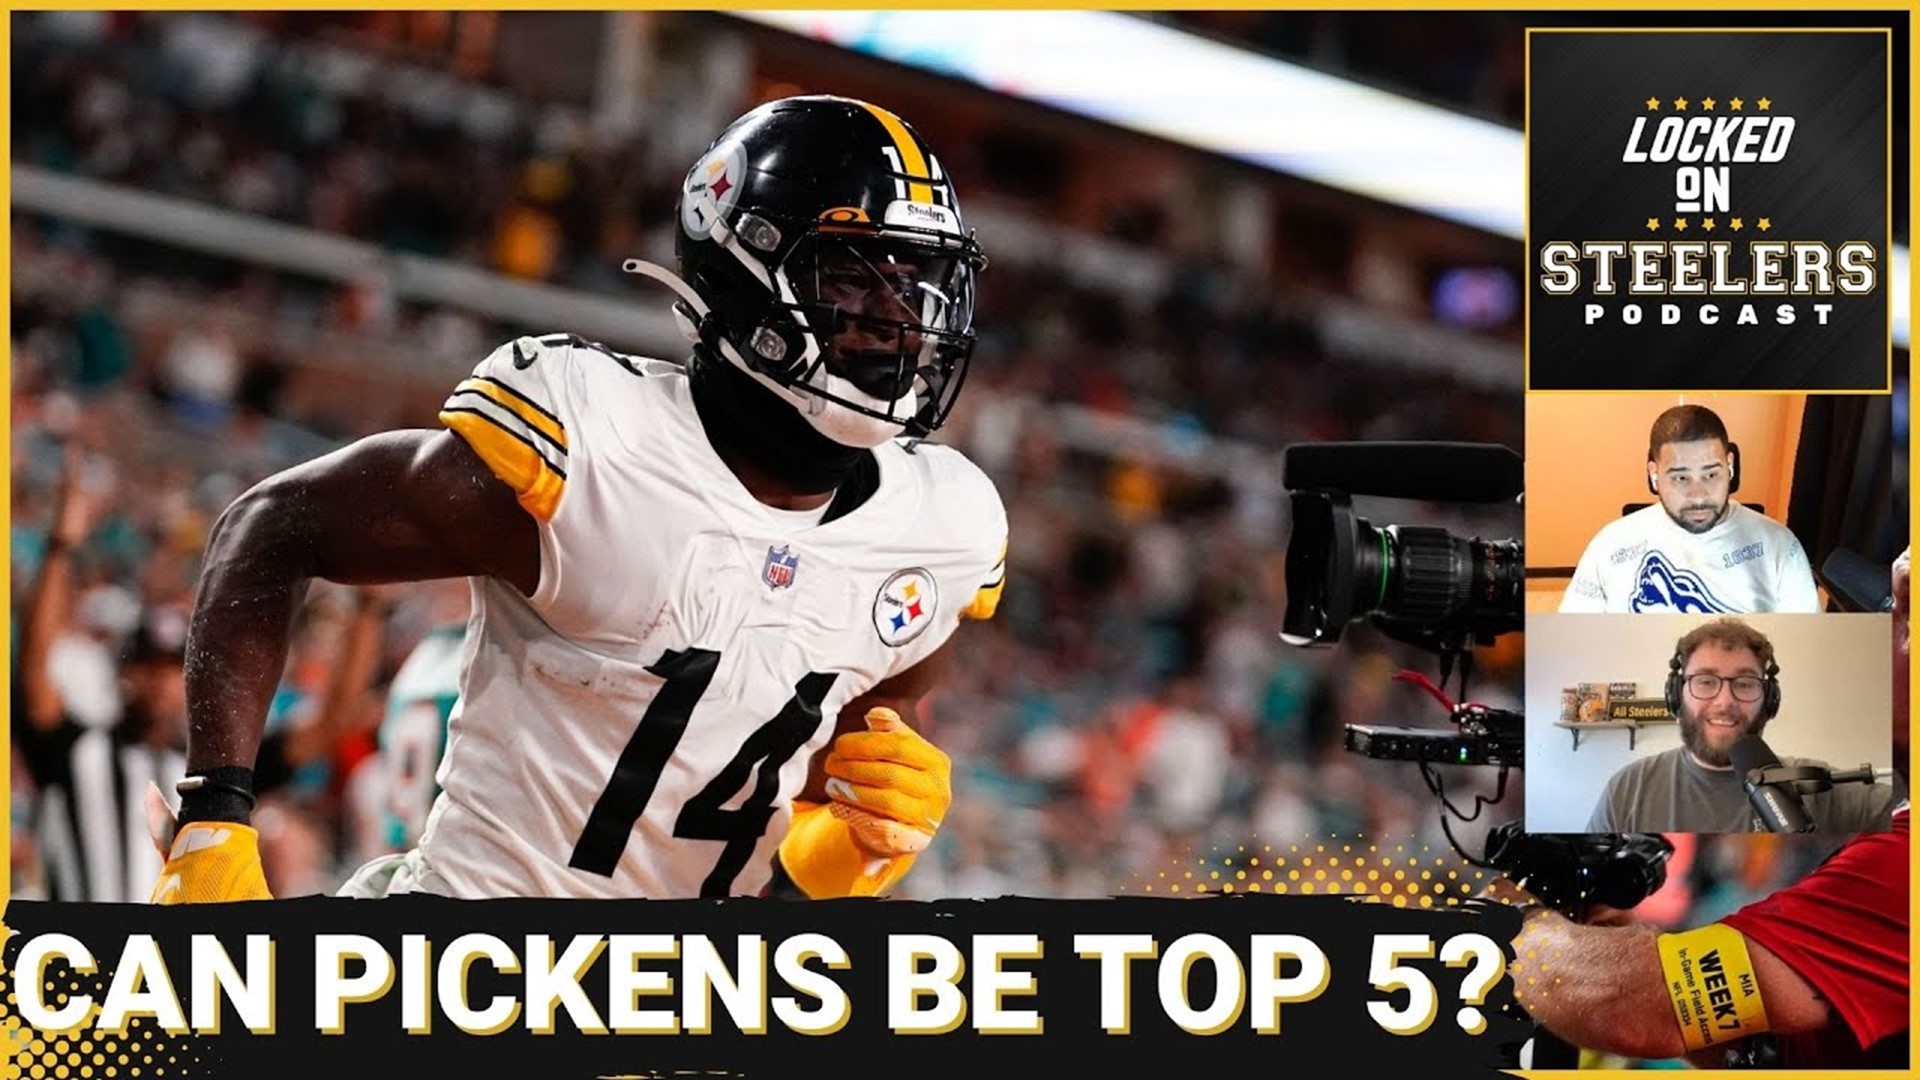 The Pittsburgh Steelers know they have a special wide receiver in George Pickens. But what does he need to do to become a top 5 NFL wide receiver?